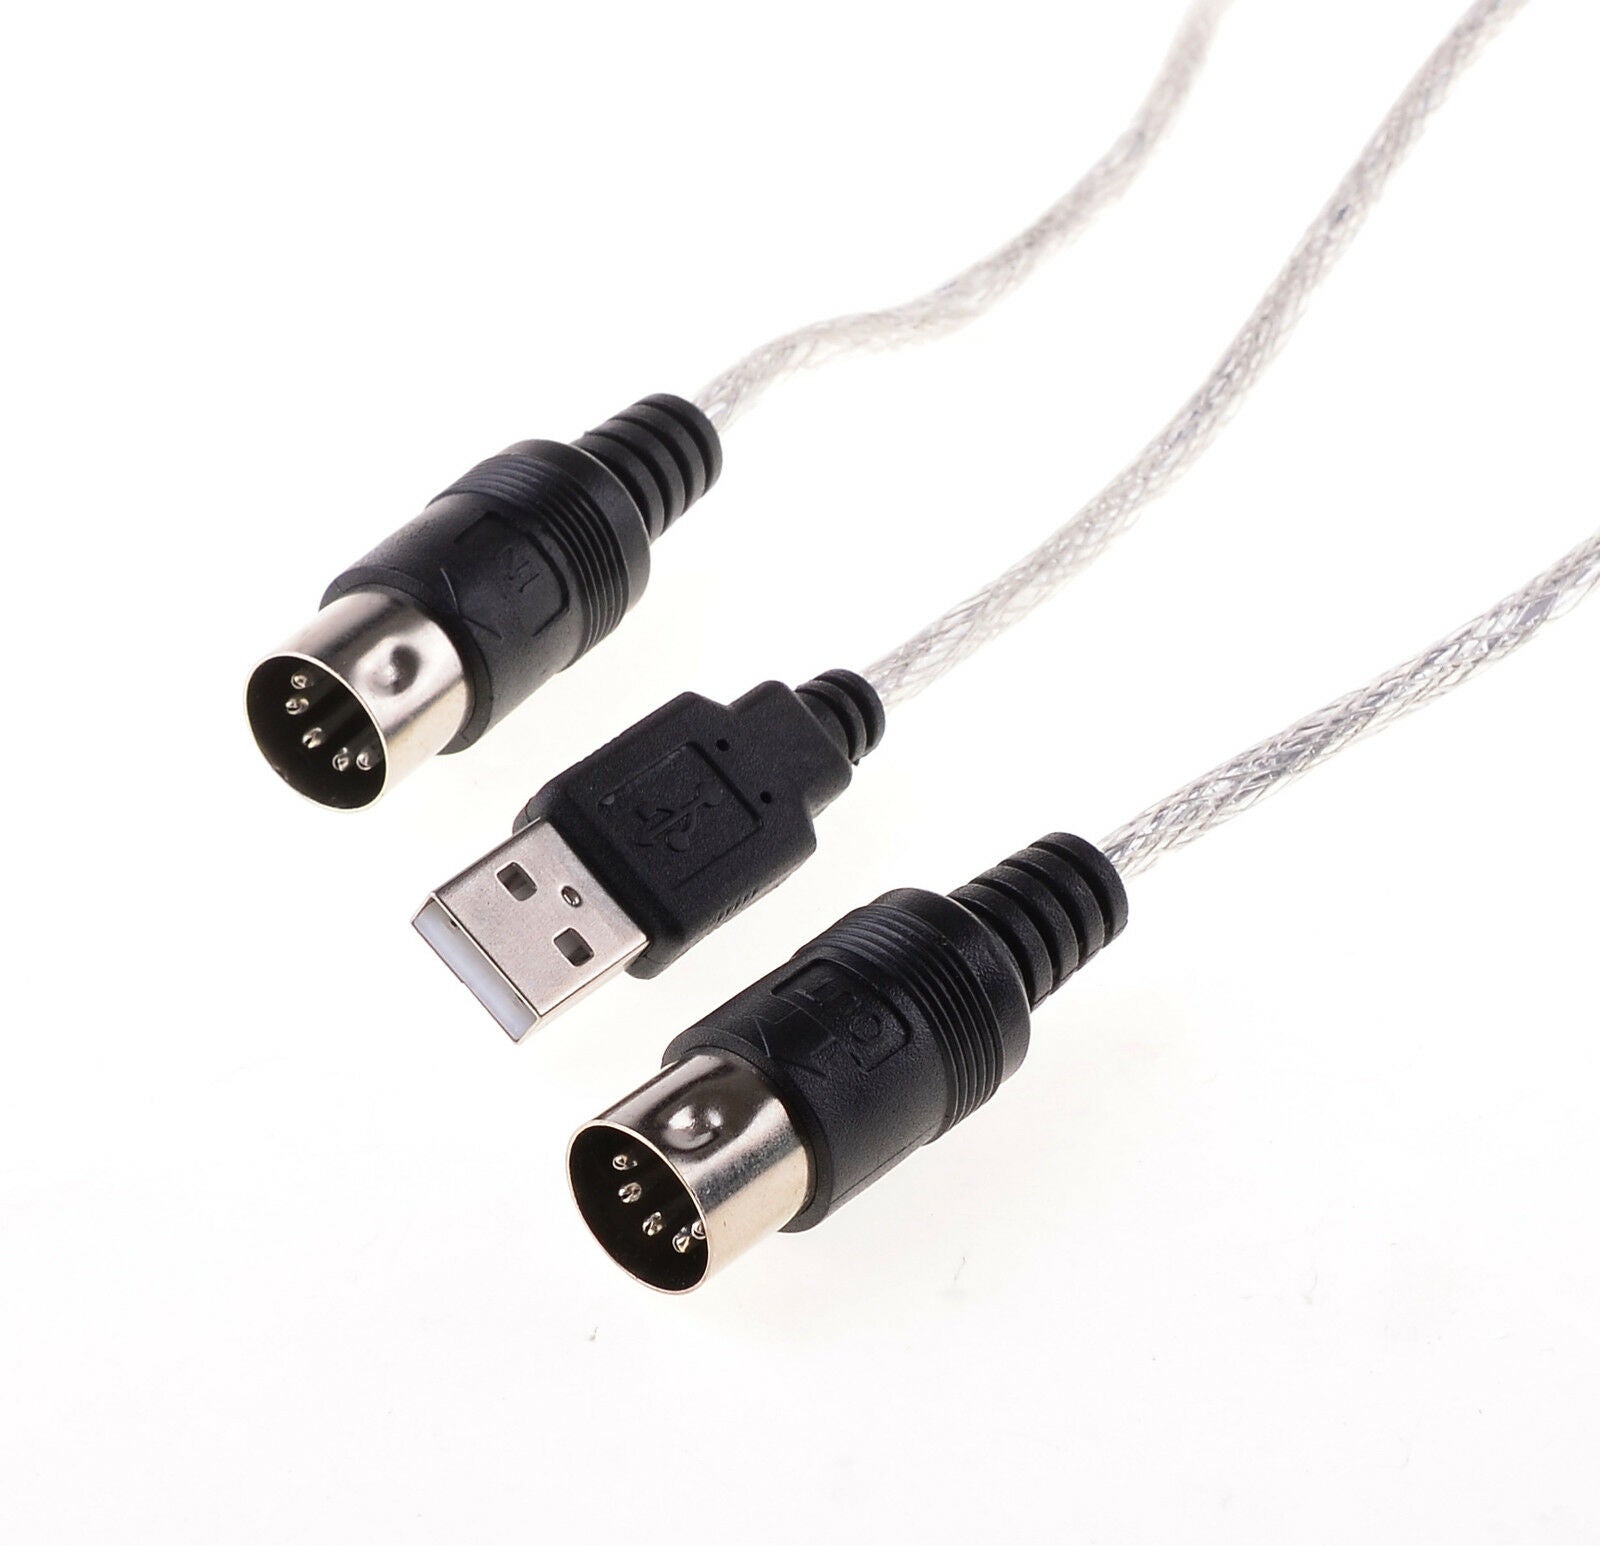 4pcs USB IN OUT MIDI Interface Cable Connect PC to Music Keyboard Adapter Cable